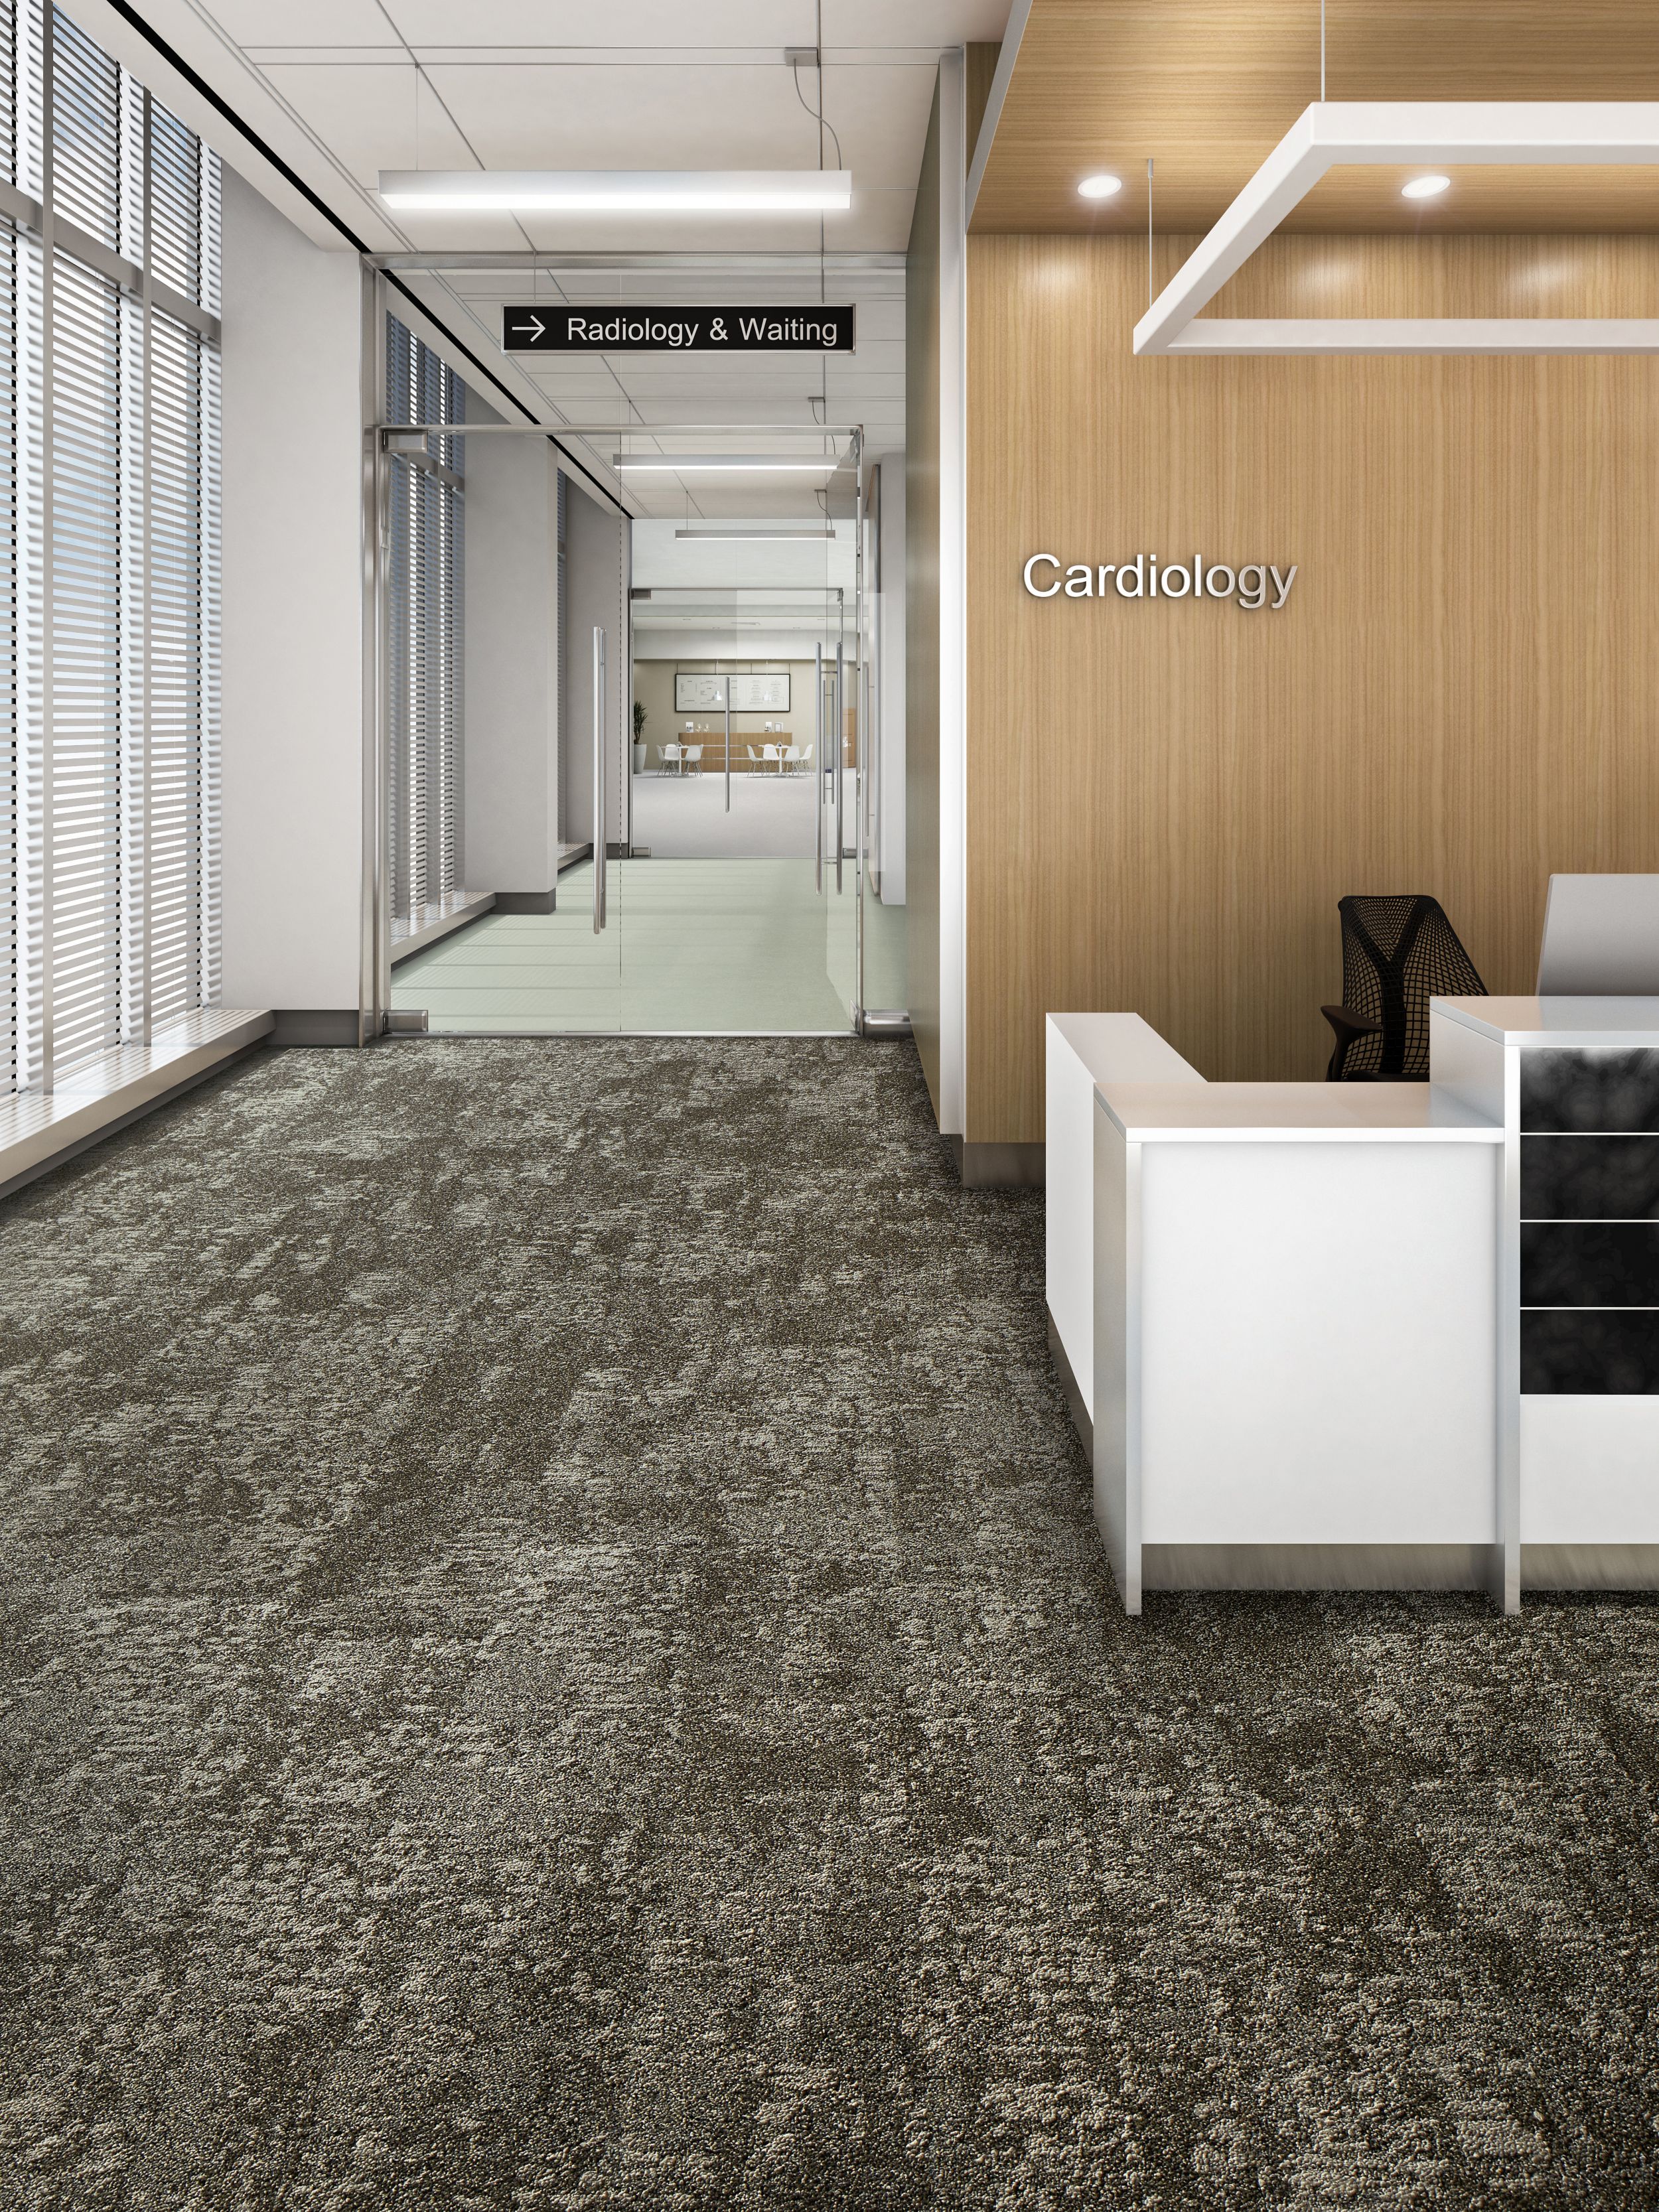 Interface Just Deserts plank carpet tile in lobby area with Plant-astic LVT in corridor imagen número 5